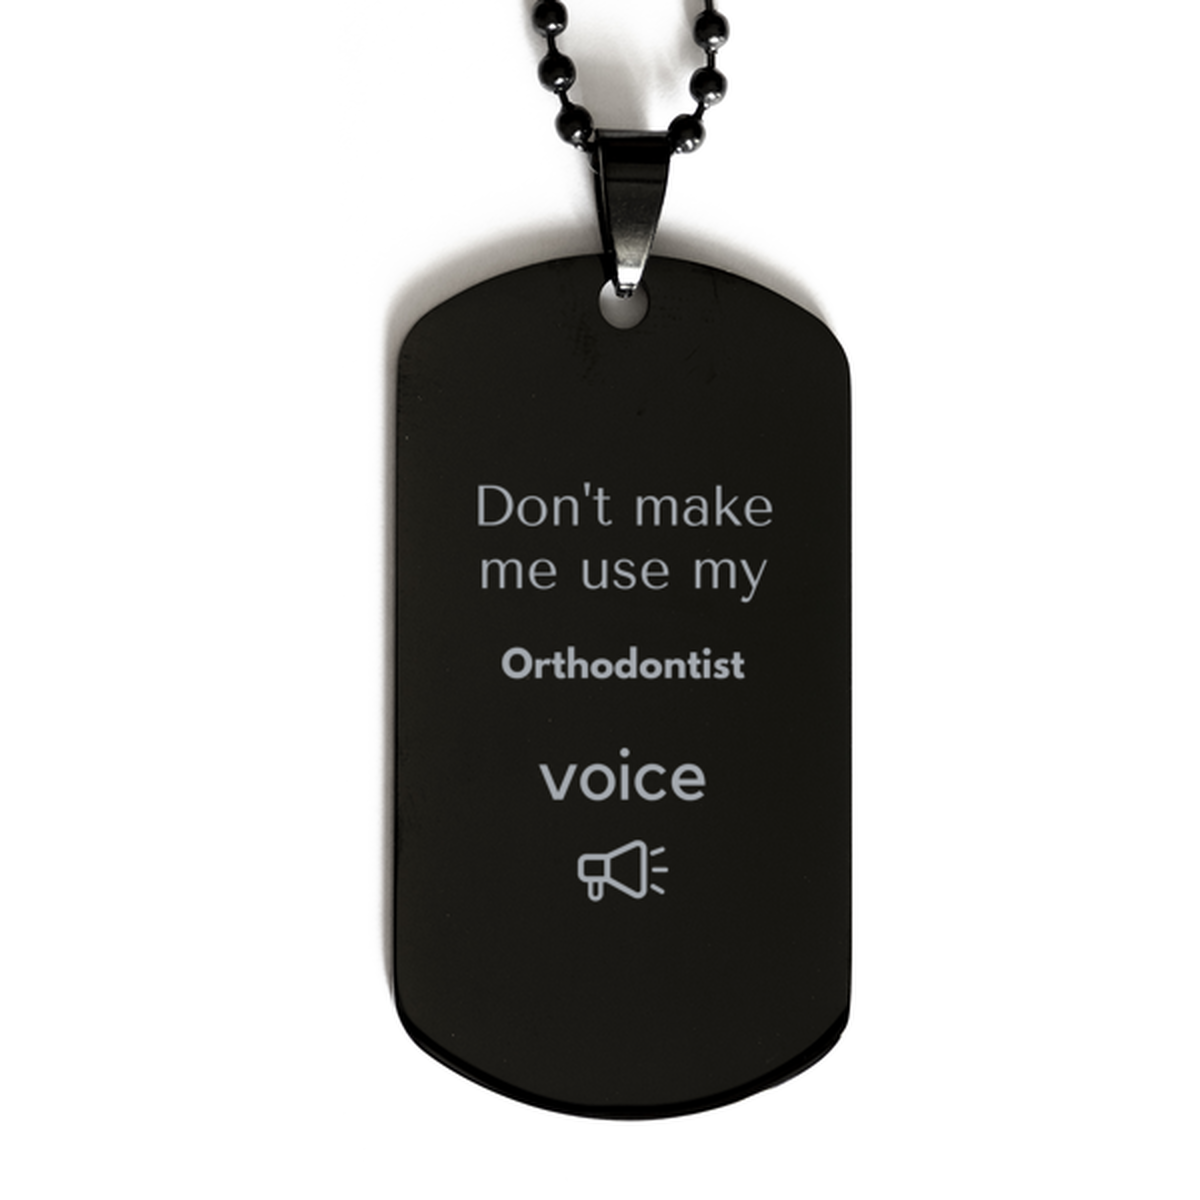 Don't make me use my Orthodontist voice, Sarcasm Orthodontist Gifts, Christmas Orthodontist Black Dog Tag Birthday Unique Gifts For Orthodontist Coworkers, Men, Women, Colleague, Friends